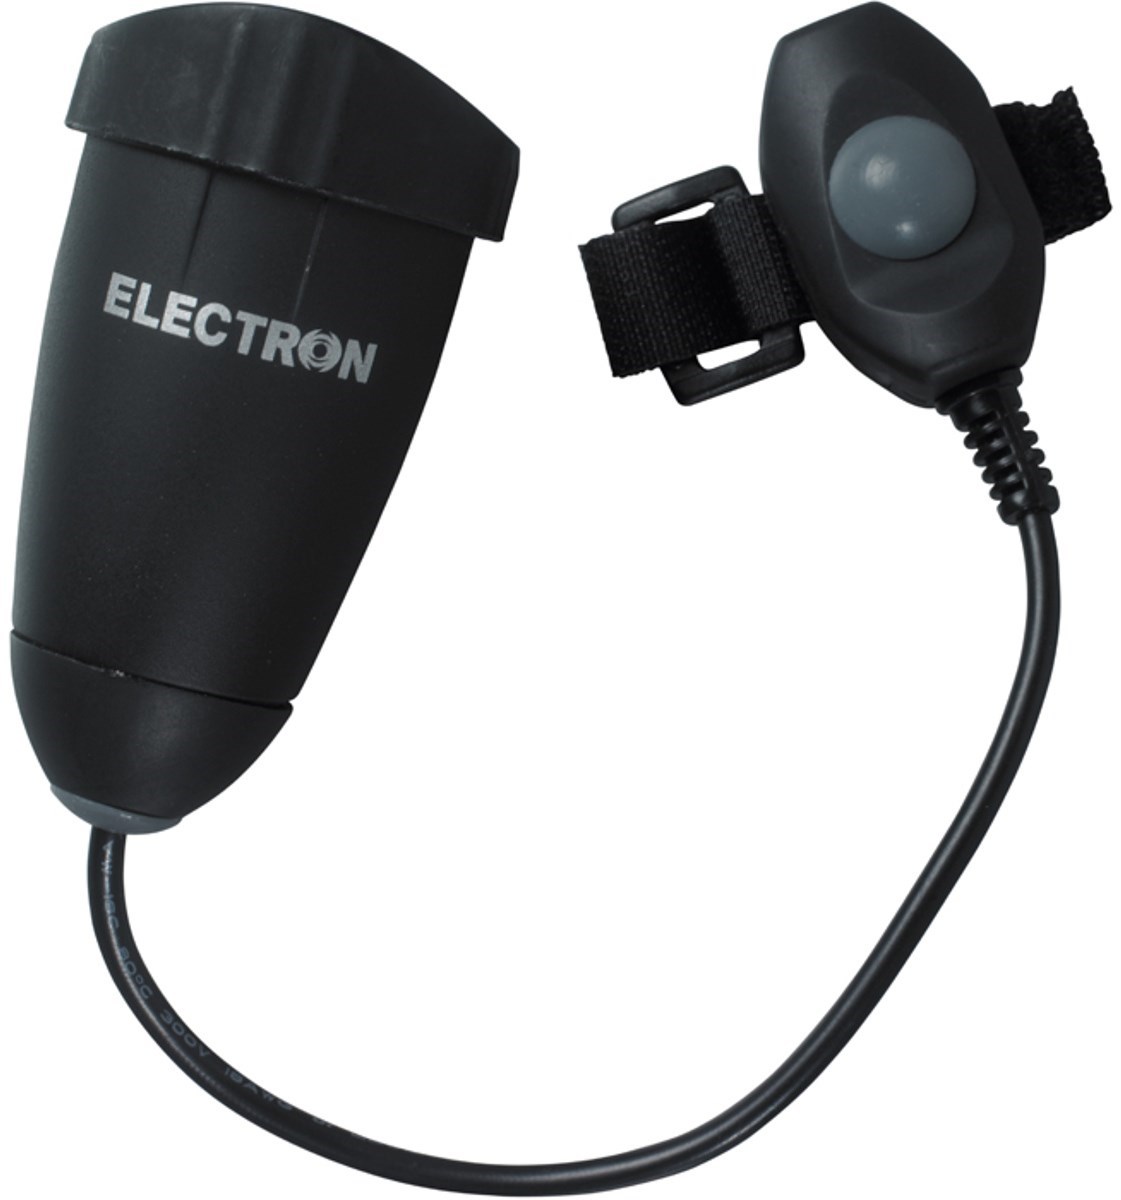 Electron Replacement Headlamp Unit With Remote Switch For EHP 300 / 310 product image